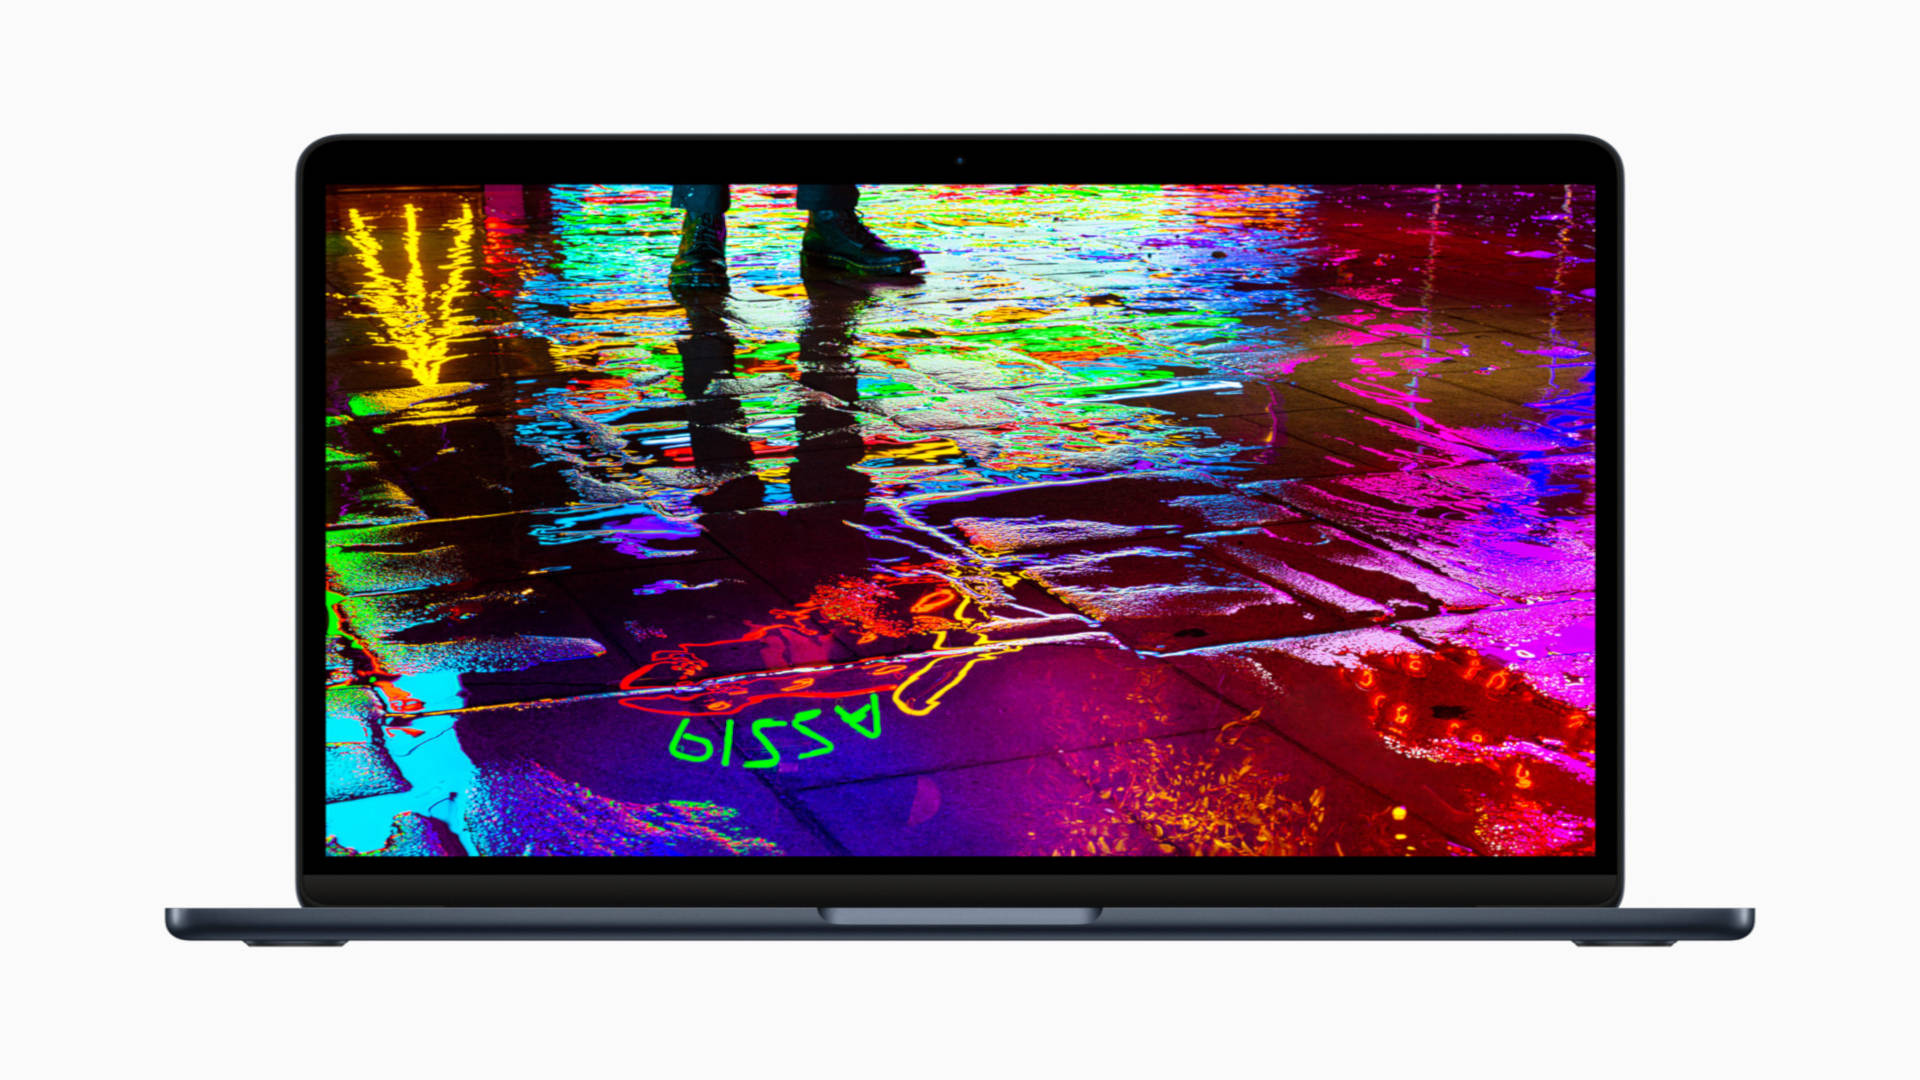 best laptops - an image of the apple macbook air with a neon sign reflected off water on the ground